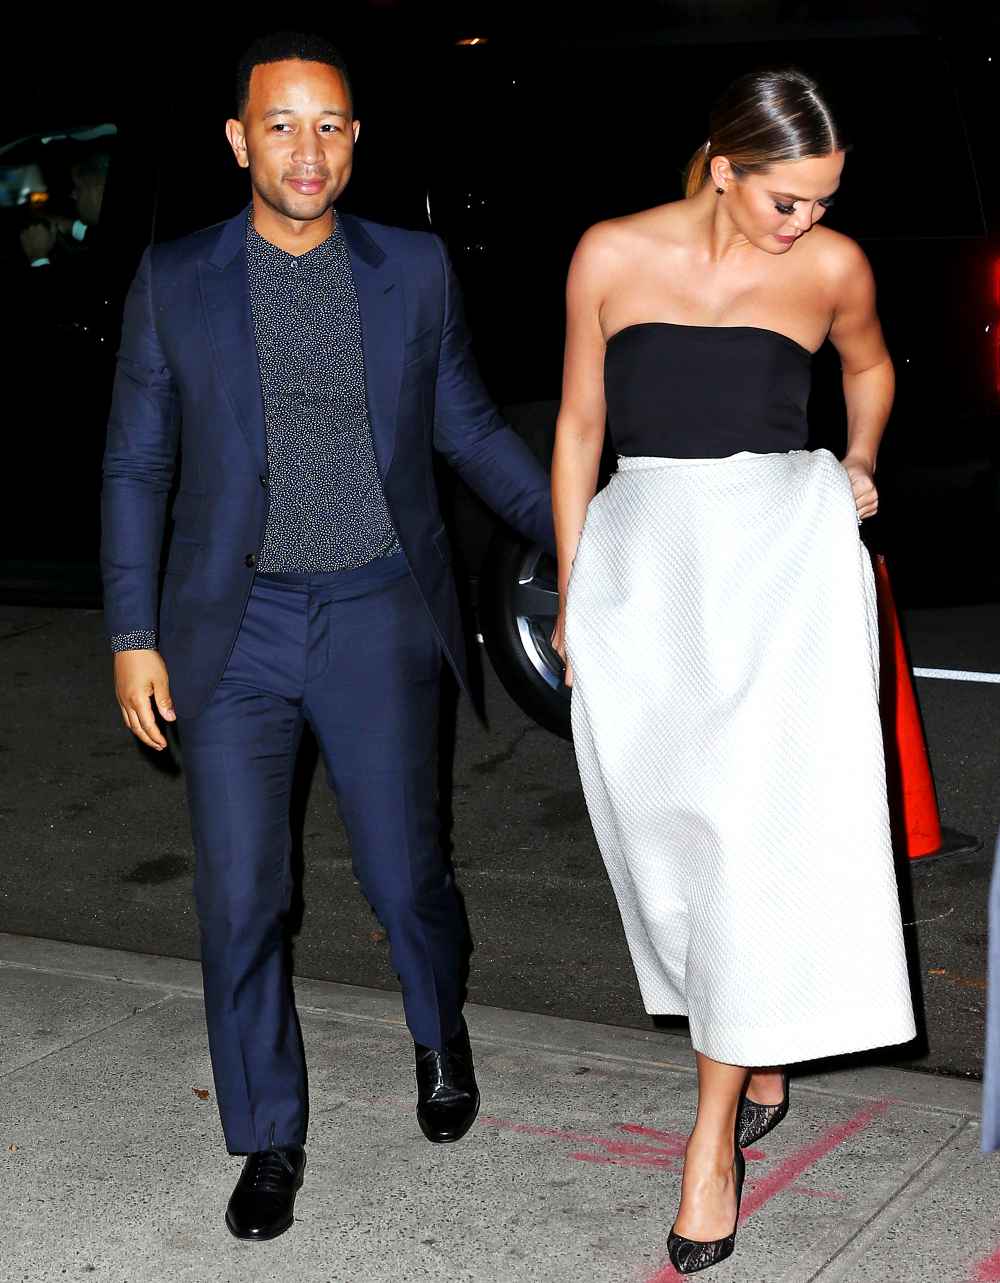 John Legend takes Chrissy Teigen out for her 30th birthday/Thanksgiving weekend in NYC.